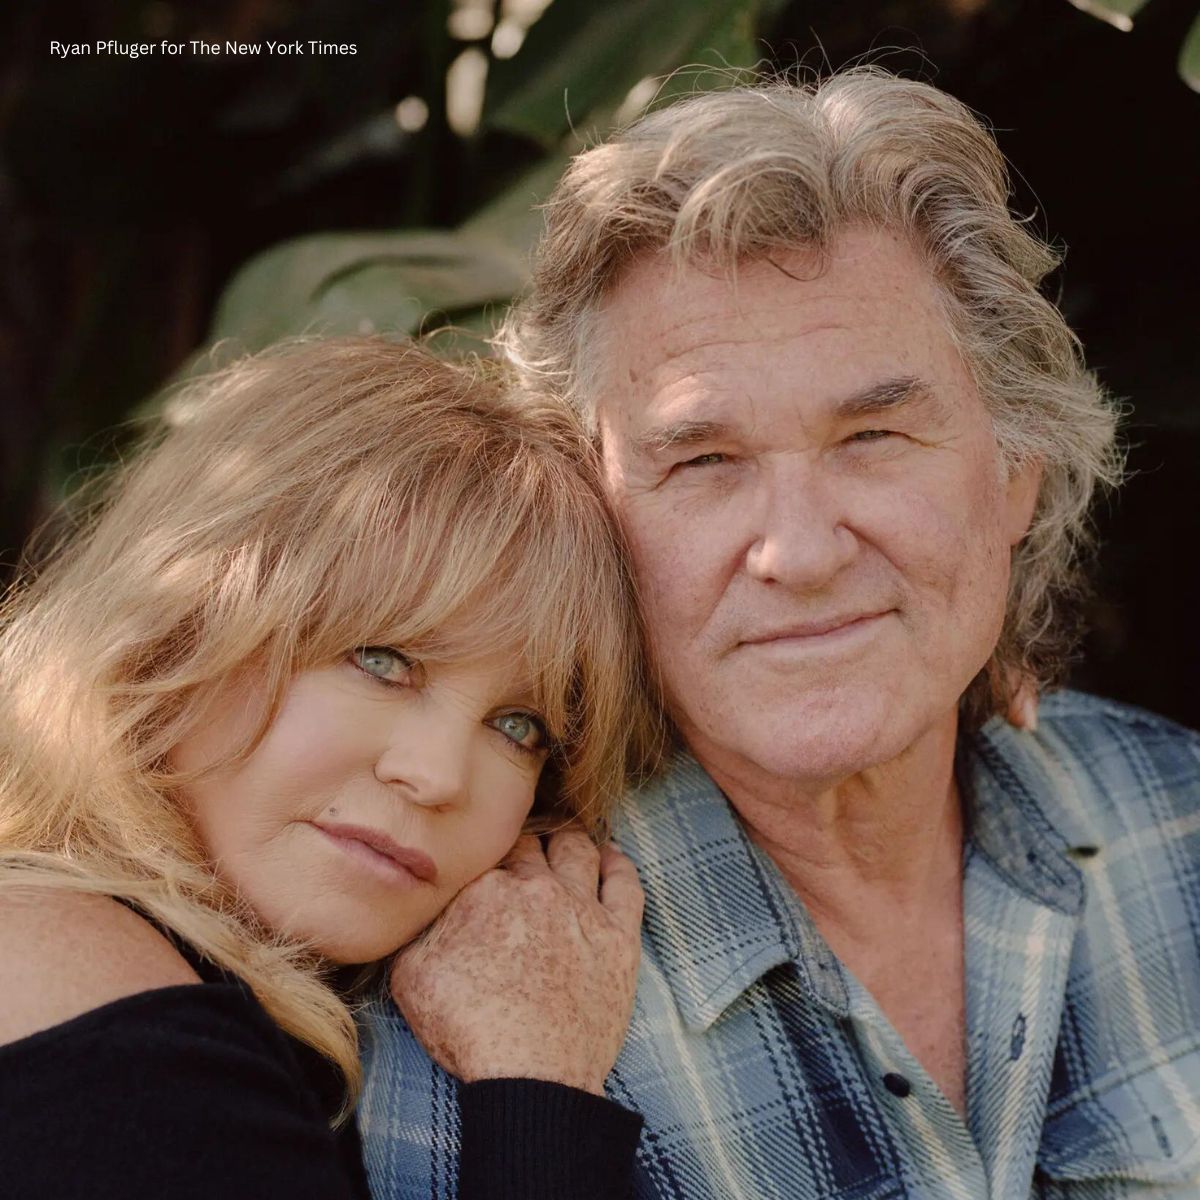 Goldie Hawn's Relationship with Kurt Russell